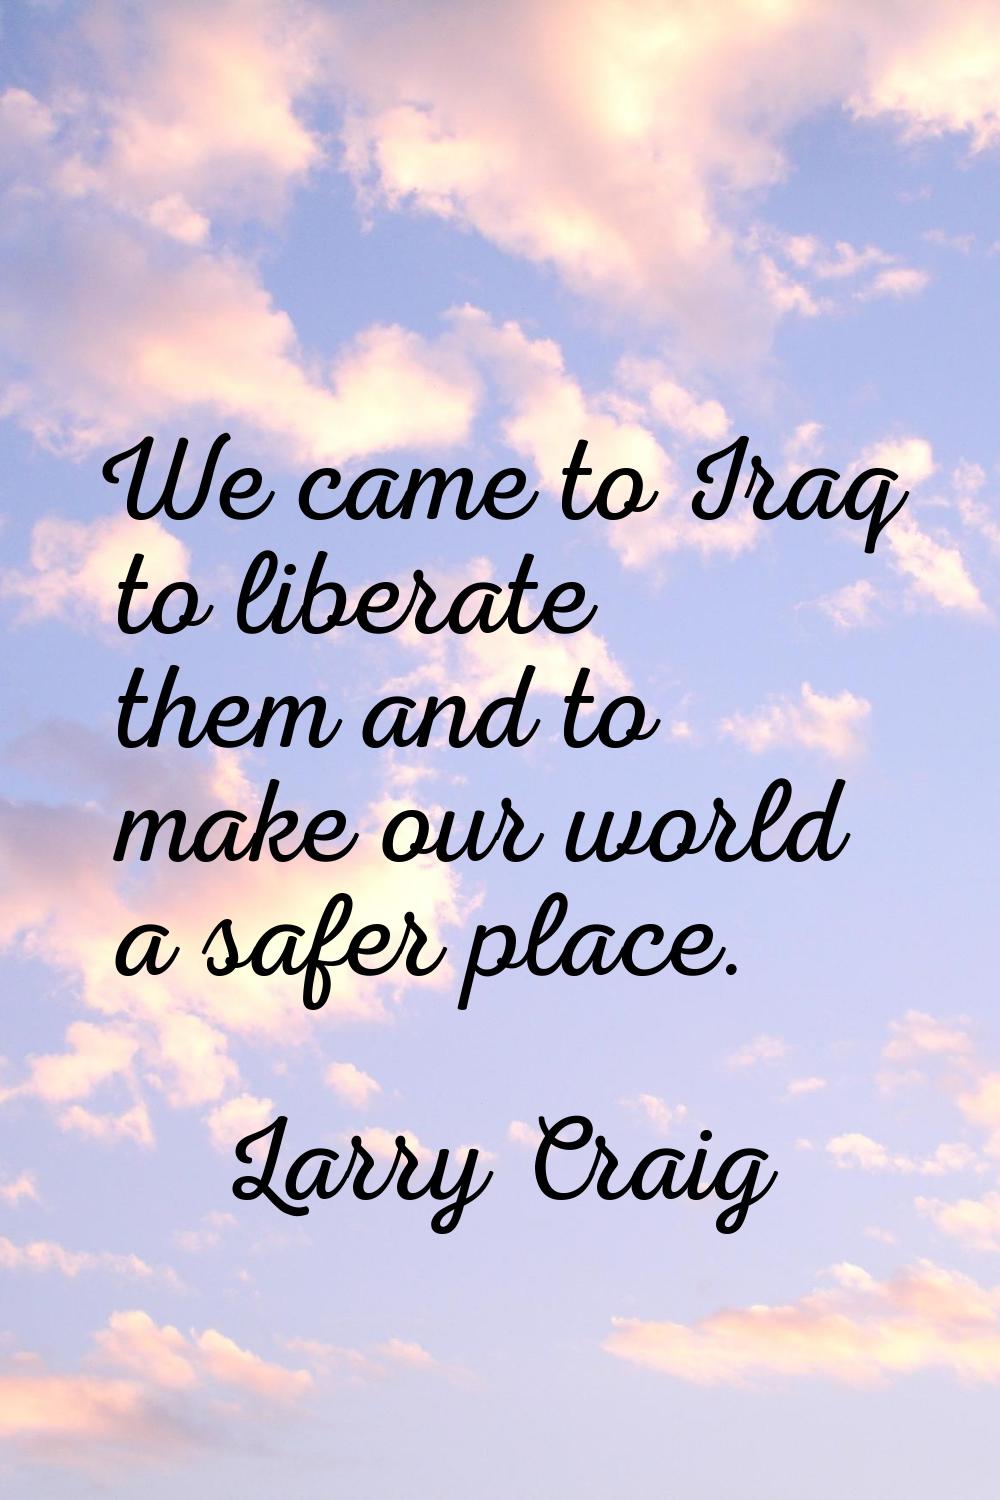 We came to Iraq to liberate them and to make our world a safer place.